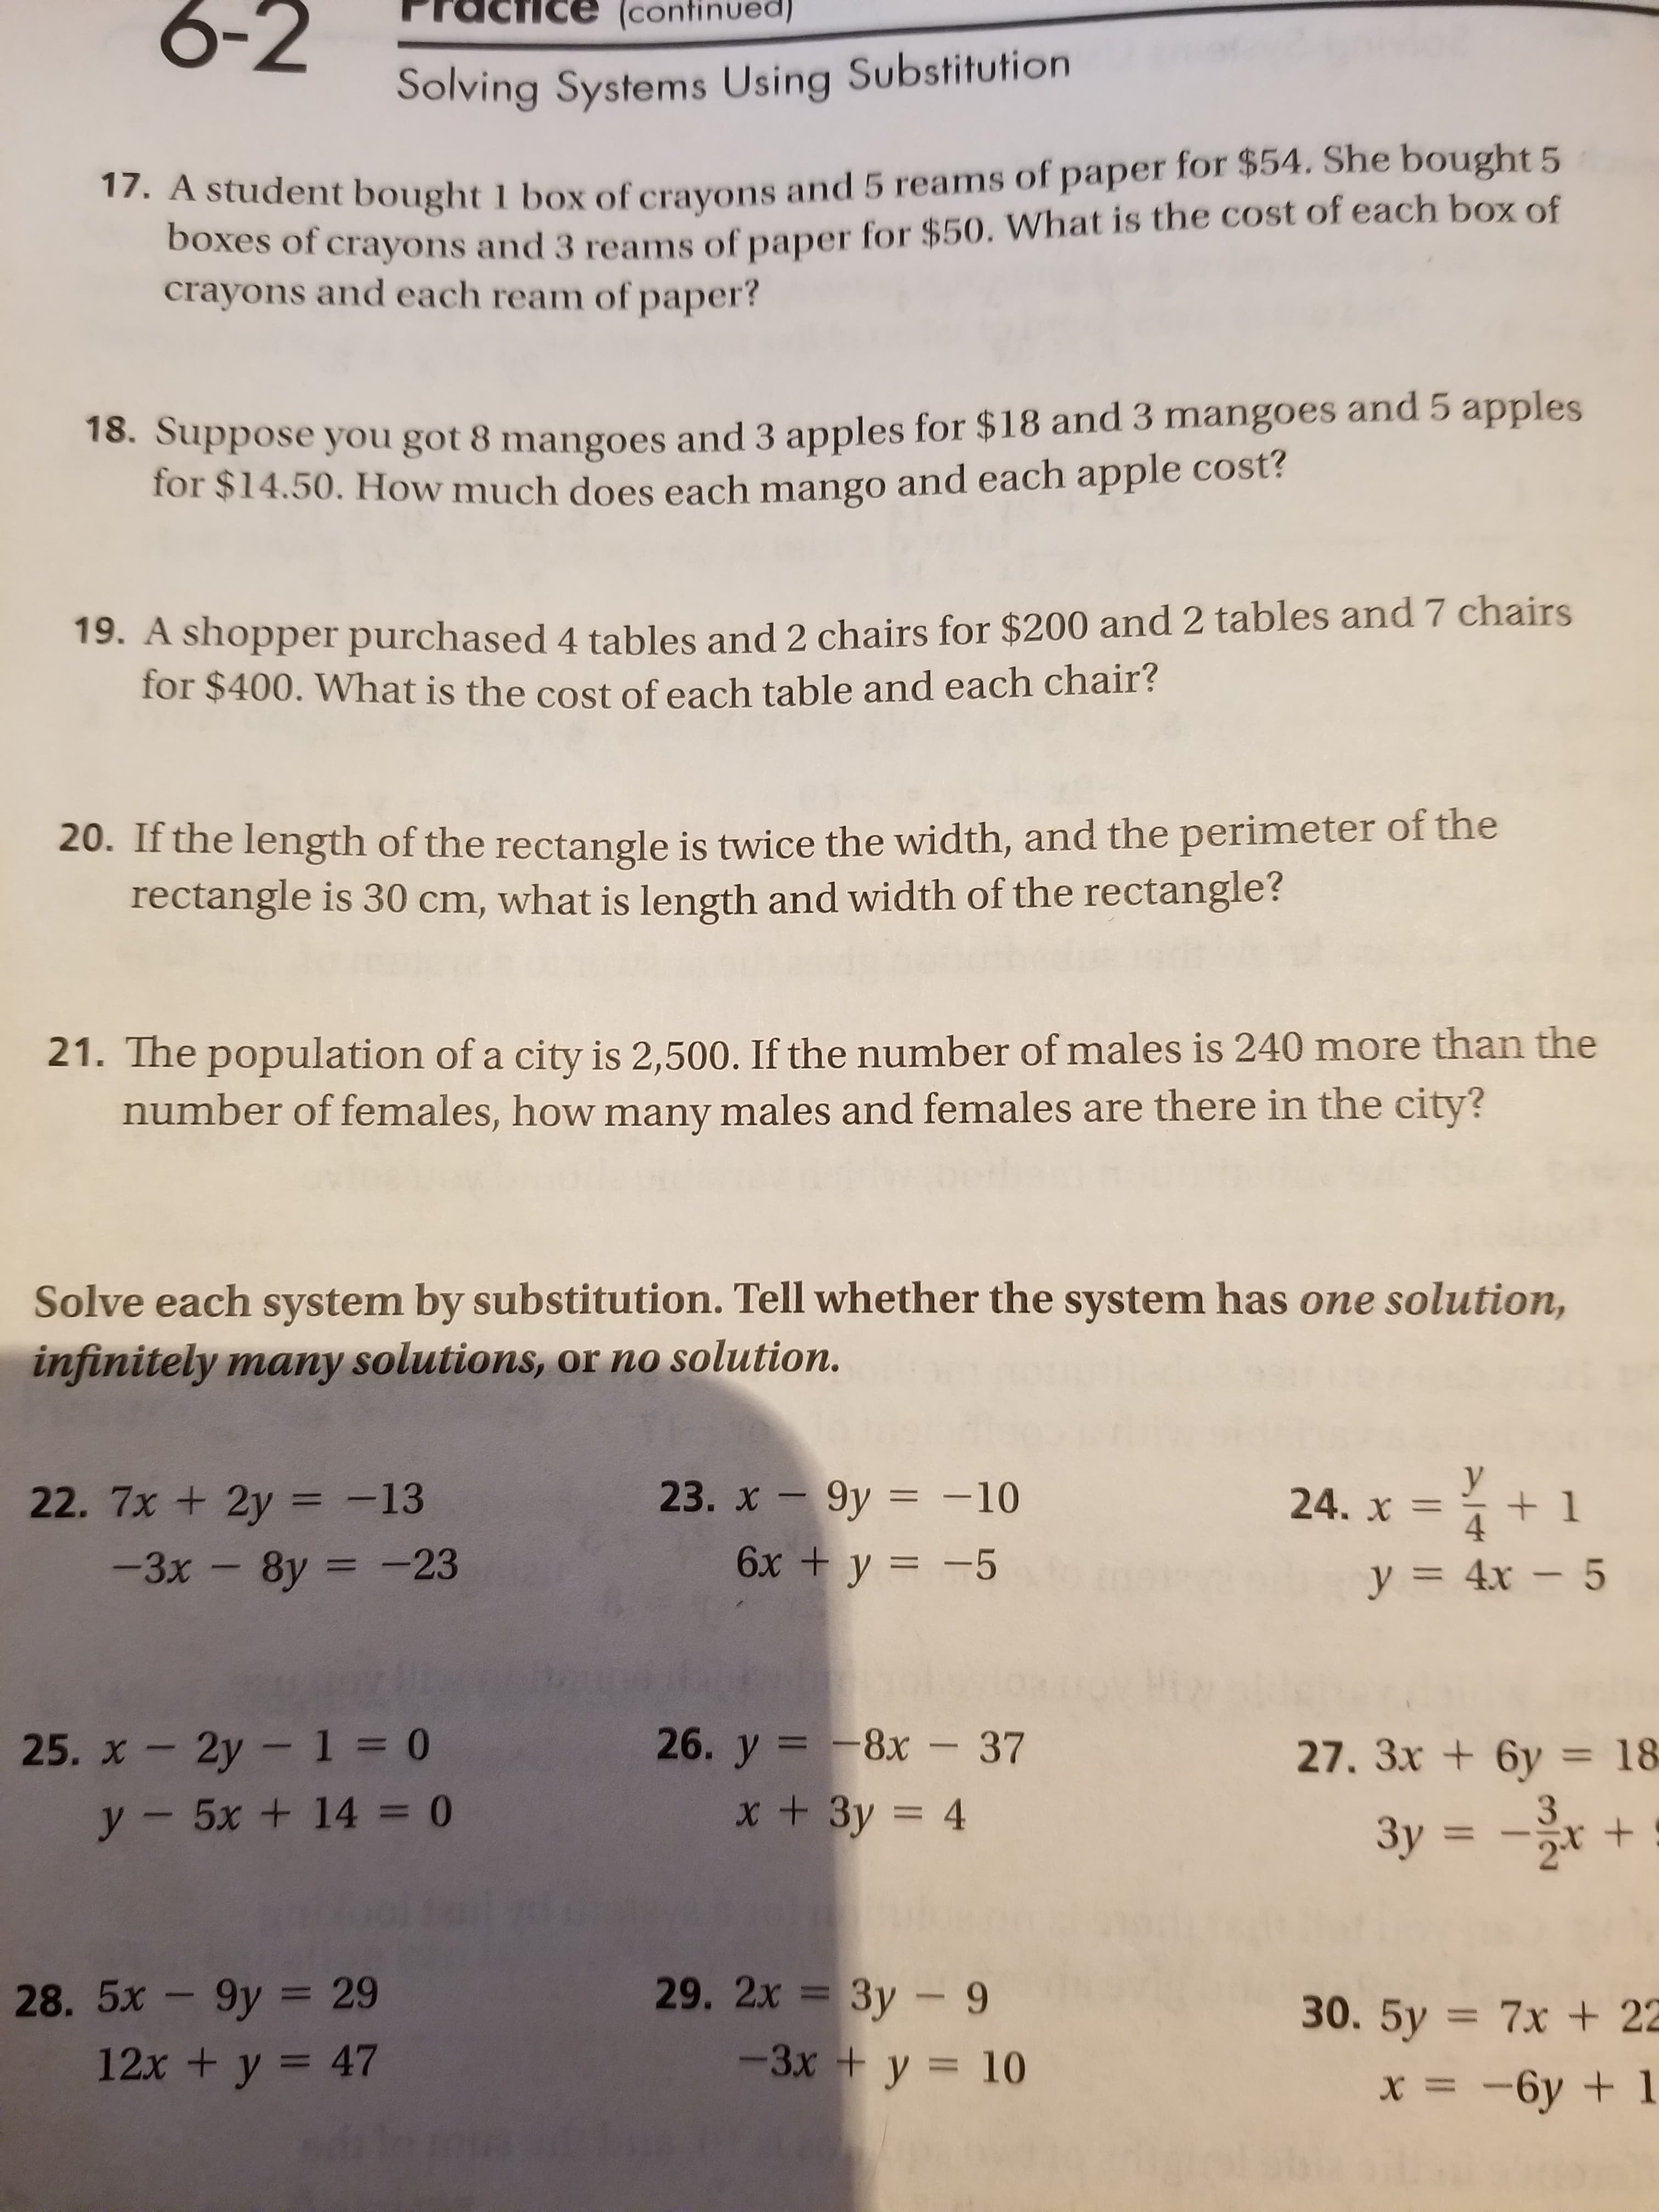 6-2
(continued)
Solving Systems Using Substitution
17. A student bought 1 box of cravons and 5 reams of paper for $54. She bought 5
Doxes of crayons and 3 reams of paper for $50. What is the cost of each box of
crayons and each ream of paper?
18. Suppose you got 8 mangoes and 3 apples for $18 and 3 mangoes and 5 apples
for $14.50. How much does each mango and each apple cost?
19. A shopper purchased 4 tables and 2 chairs for $200 and 2 tables and 7 chairs
for $400. What is the cost of each table and each chair?
20. If the length of the rectangle is twice the width, and the perimeter of the
rectangle is 30 cm, what is length and width of the rectangle?
21. The population of a city is 2,500. If the number of males is 240 more than the
number of females, how many males and females are there in the city?
Solve each system by substitution. Tell whether the system has one solution,
infinitely many solutions, or no solution.
23. x - 9y = -10
24. x =
22. 7x + 2y = -13
+1
6x + y = -5
-3х -8у 3 -23
y = 4x – 5
26. у %3D -8х -37
25. x- 2y-1 = 0
27. 3x + 6y = 18
%3D
x+3y = 4
y- 5x + 14 = 0
3y = -r +
%3D
29. 2х 3D Зу - 9
3y - 9
-3x + y = 10
28.5x-9y = 29
30. 5y = 7x +22
%3D
12x + y = 47
%3D
X = -6y + 1
